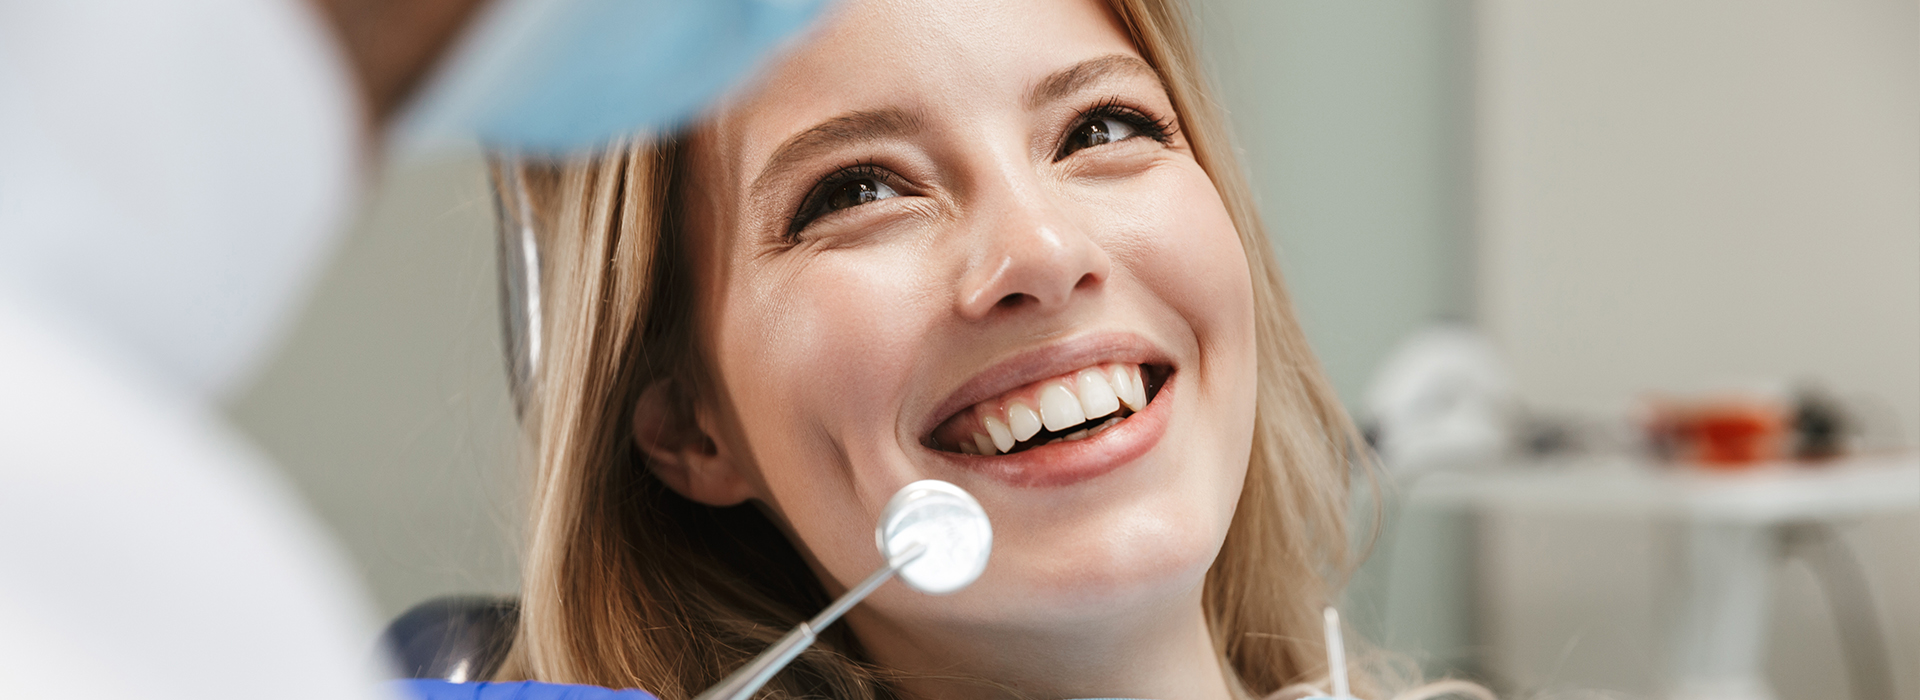 Modern Dental Care of Queens | Trios5 reg  Intraoral Scanner, Periodontal Treatment and Implant Restorations